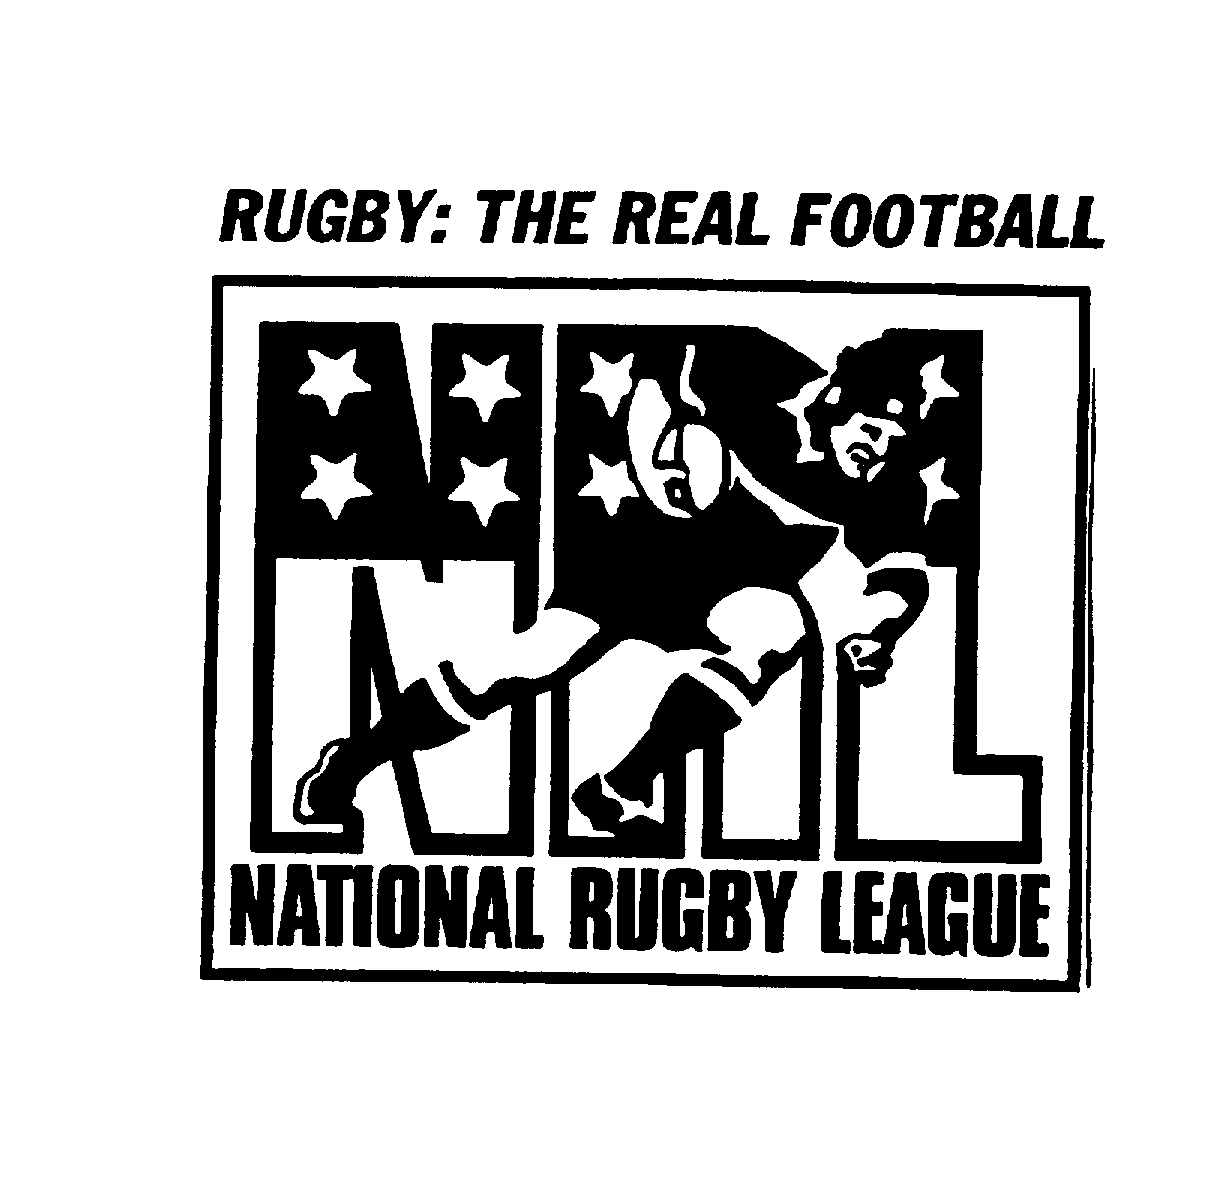  RUGBY: THE REAL FOOTBALL NRL NATIONAL RUGBY LEAGUE